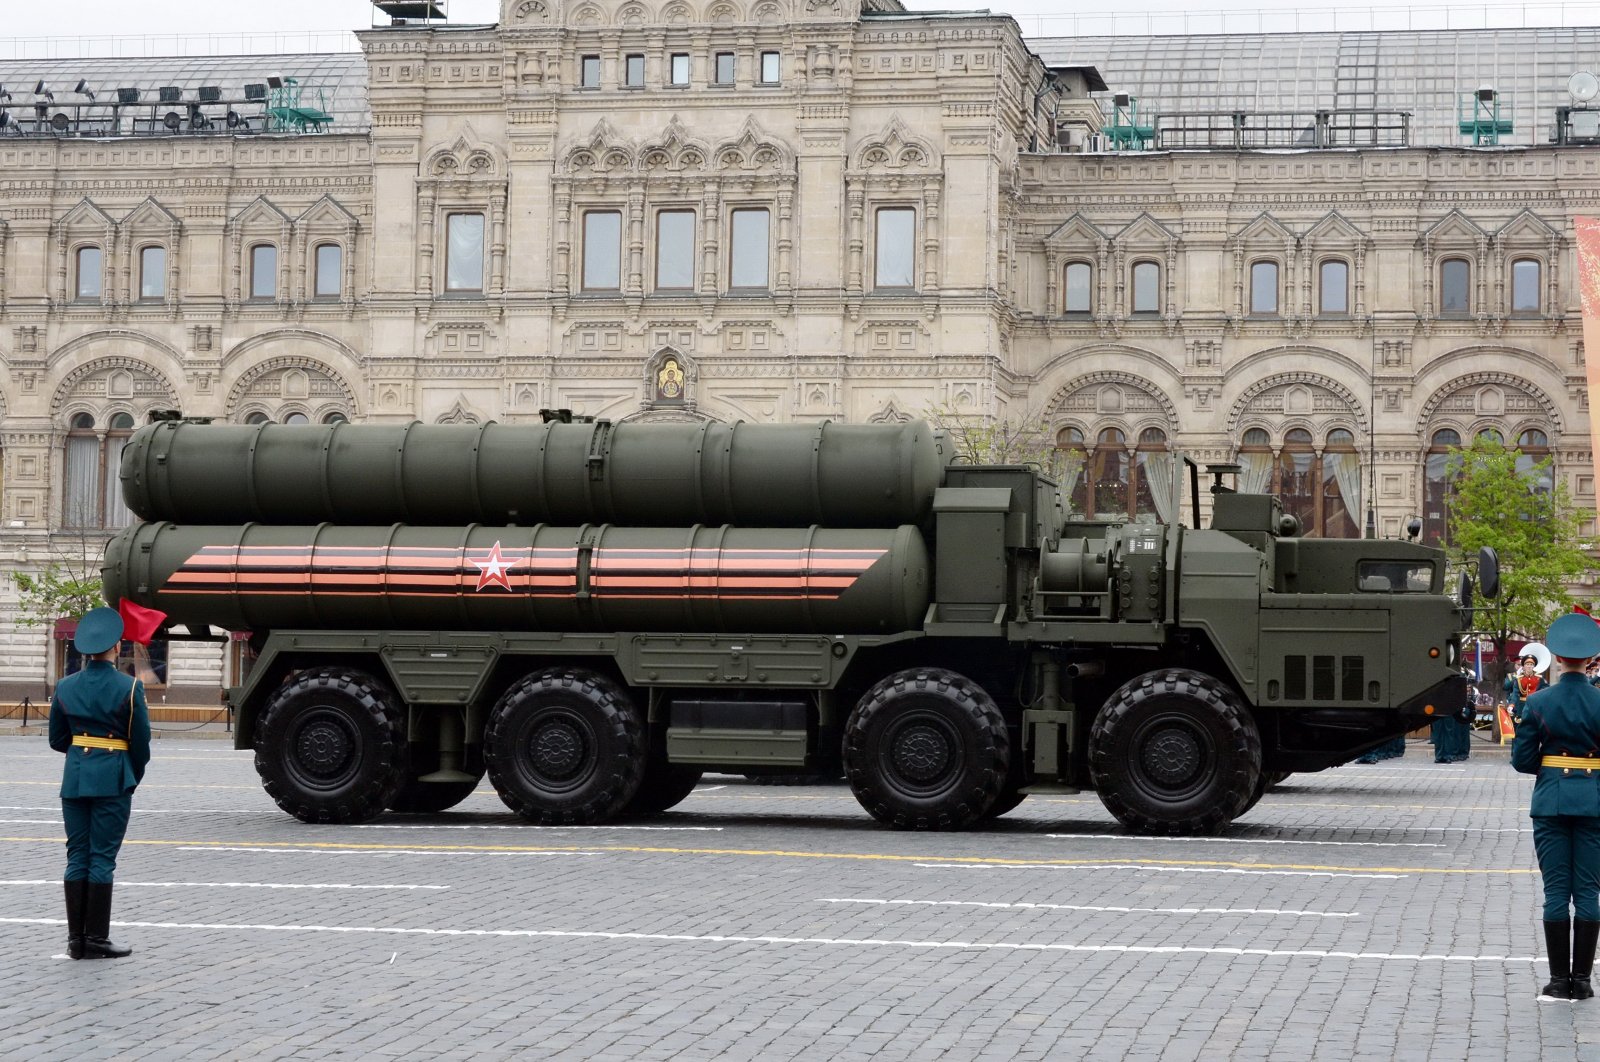 A Russian S-400 Triumf long and medium-range antiaircraft missile system seen during a rehearsal of the parade in honor of Victory Day, Moscow, Russia, May 6, 2018. (Shutterstock Photo)